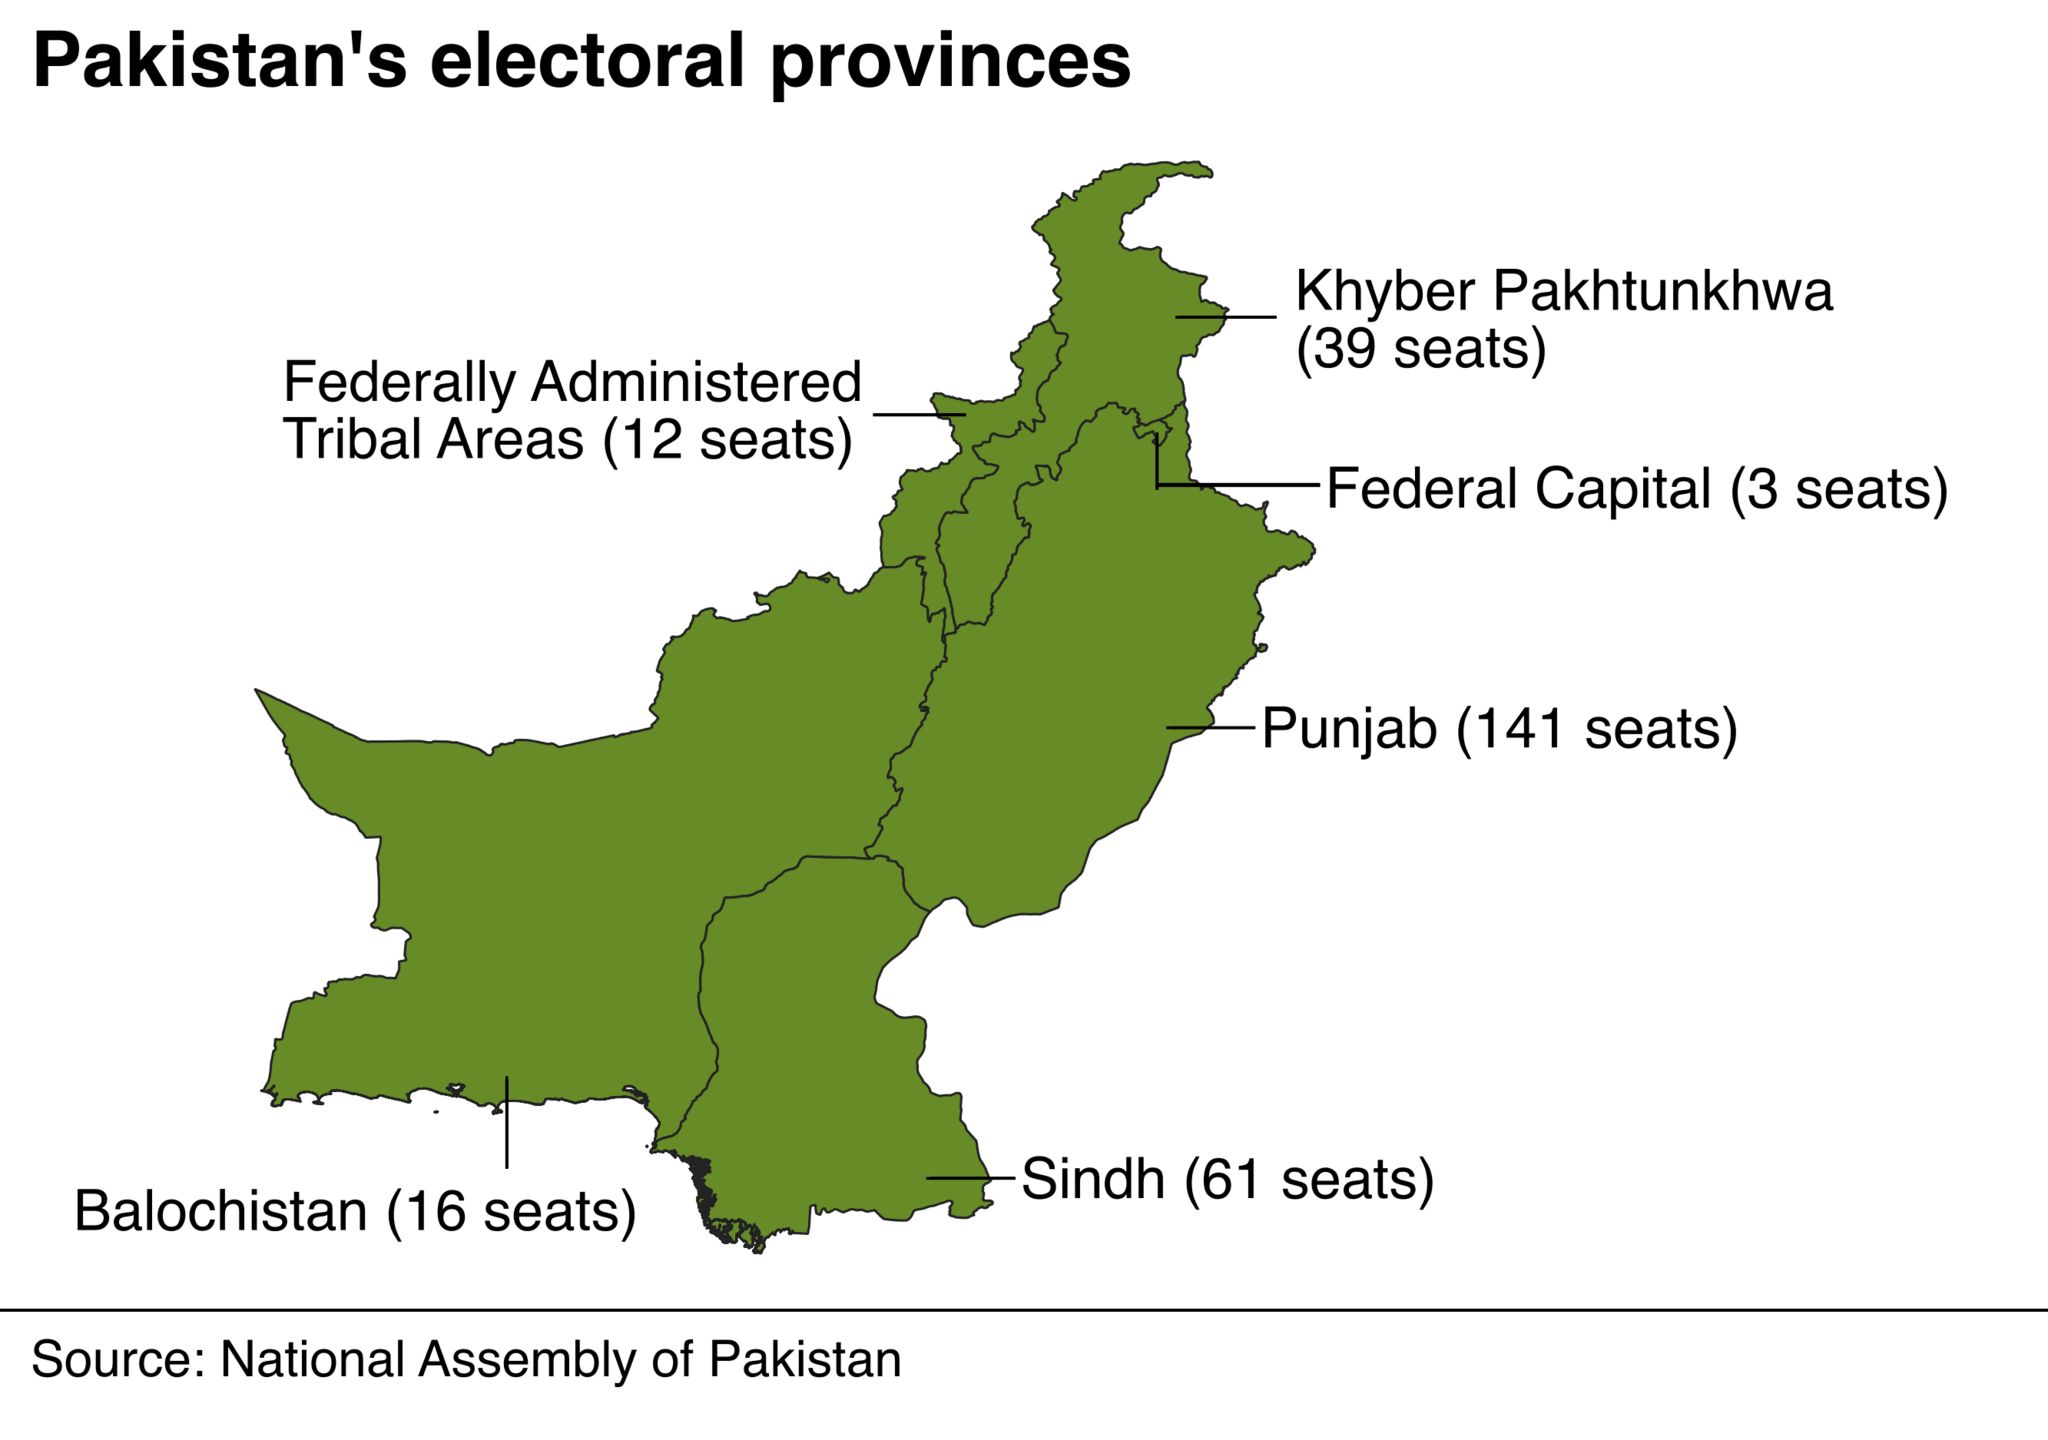 Map showing Pakistan's electoral provinces and the number of seats in each one. More than half - 141 out of 272 - are in Punjab